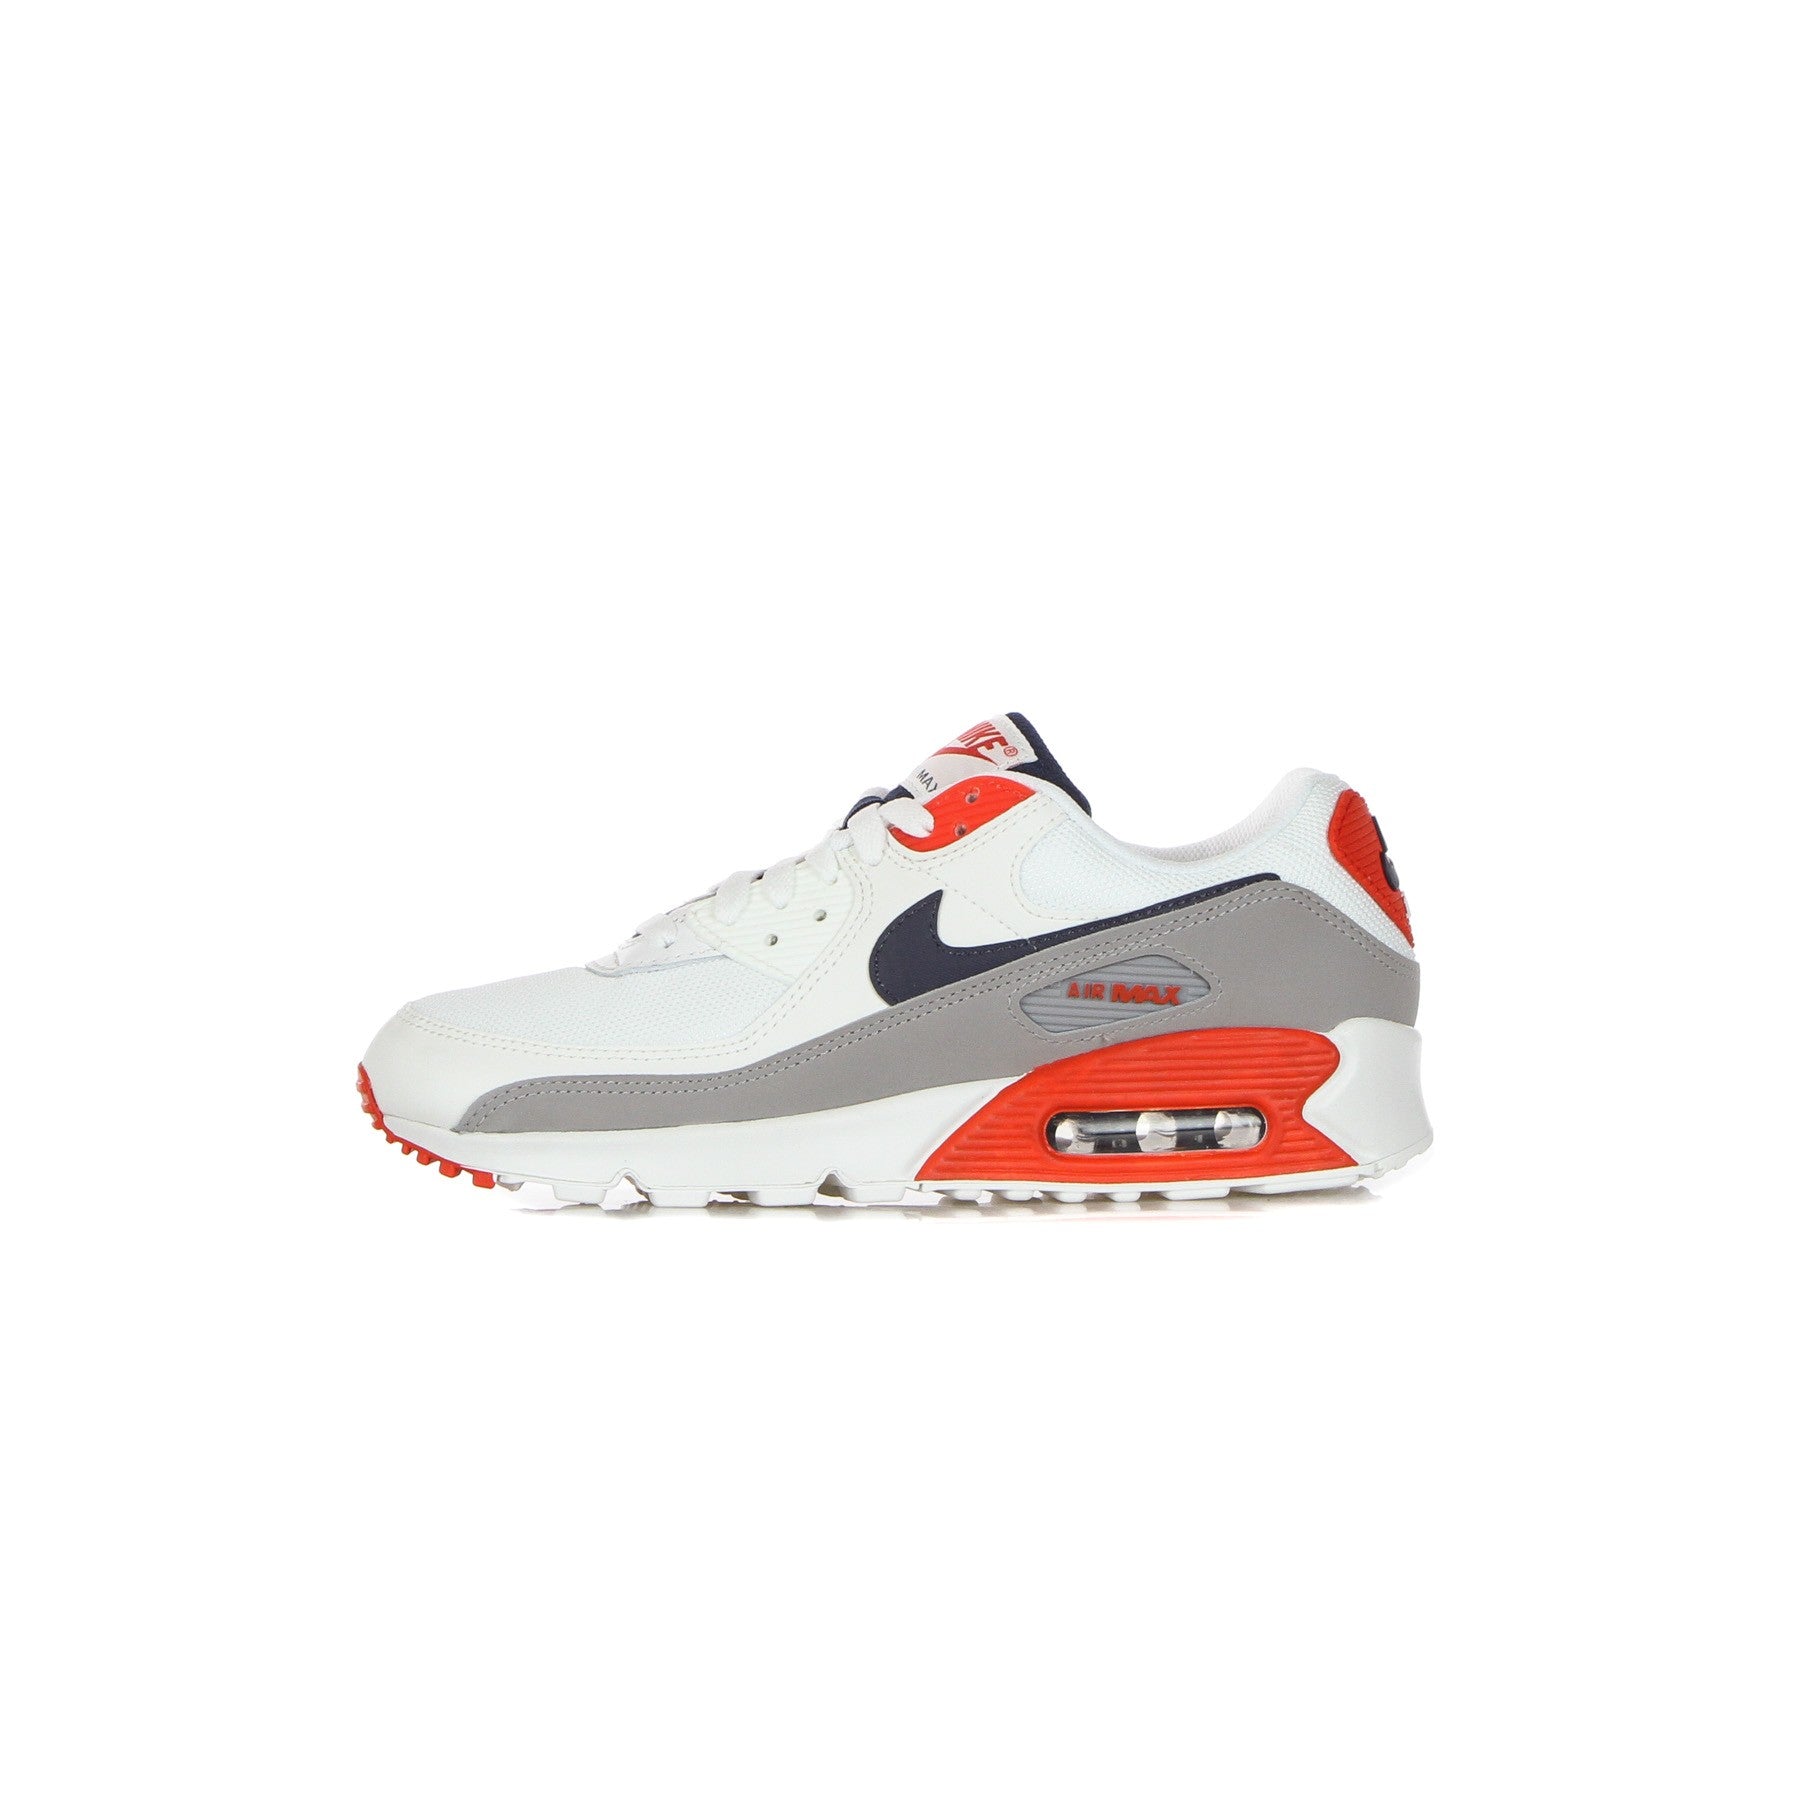 Air Max 90 Summit White/thunder Blue/cement Gray Men's Low Shoe